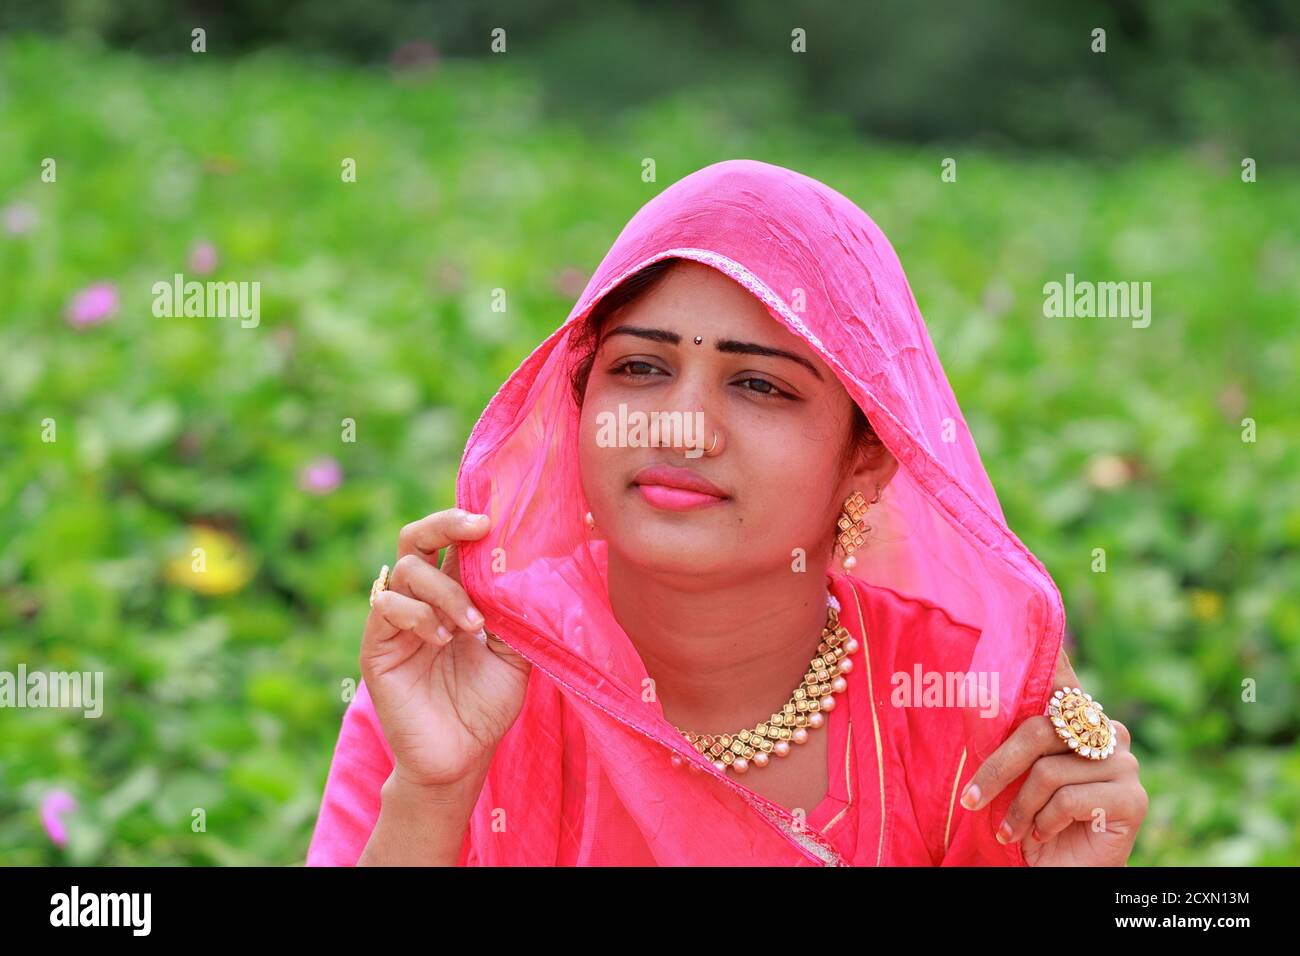 close-up portrait of An Indian young attractive stylish blonde woman posing in outdoors nature in summer fashion style traditional dress wearing rajpu Stock Photo